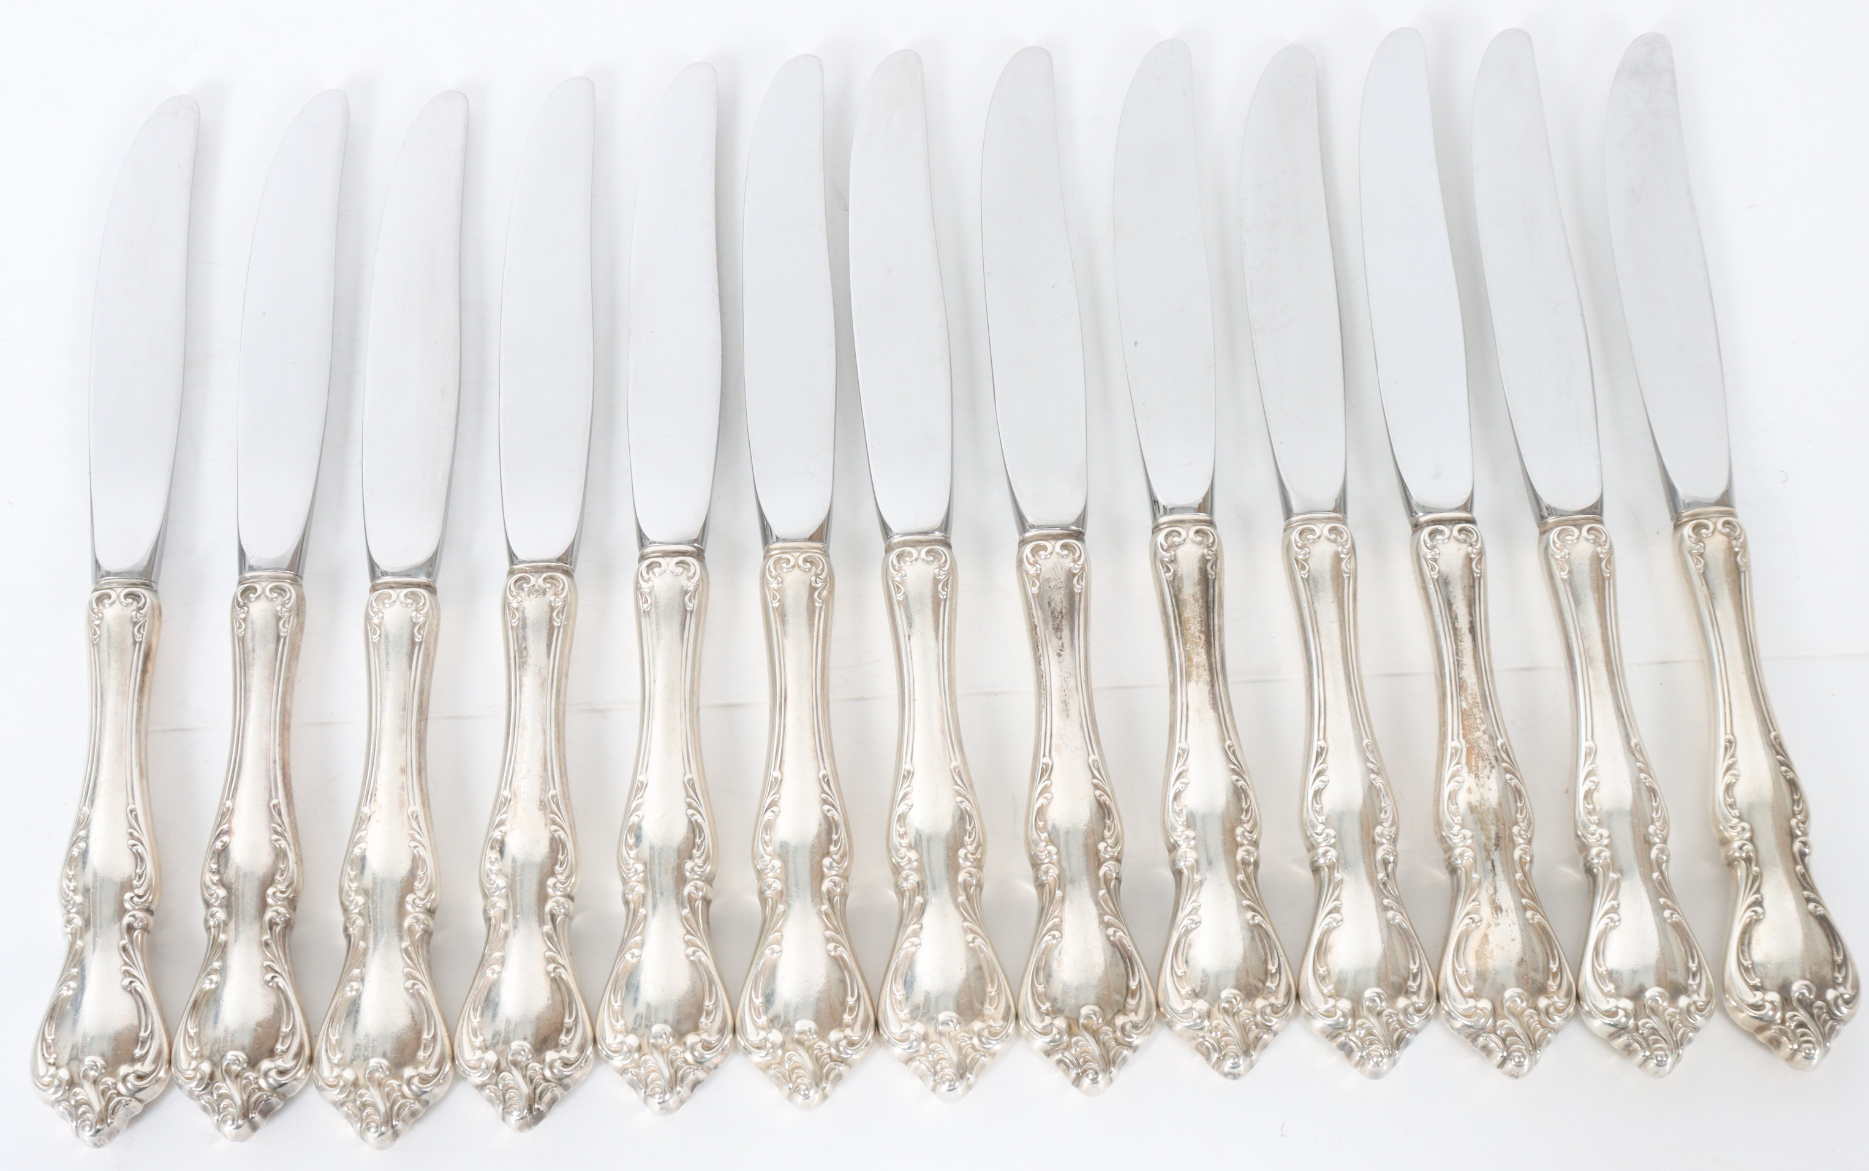 (51) Pc 1959 Towle Sterling Silverware Set, 81 OZT - Image 6 of 11